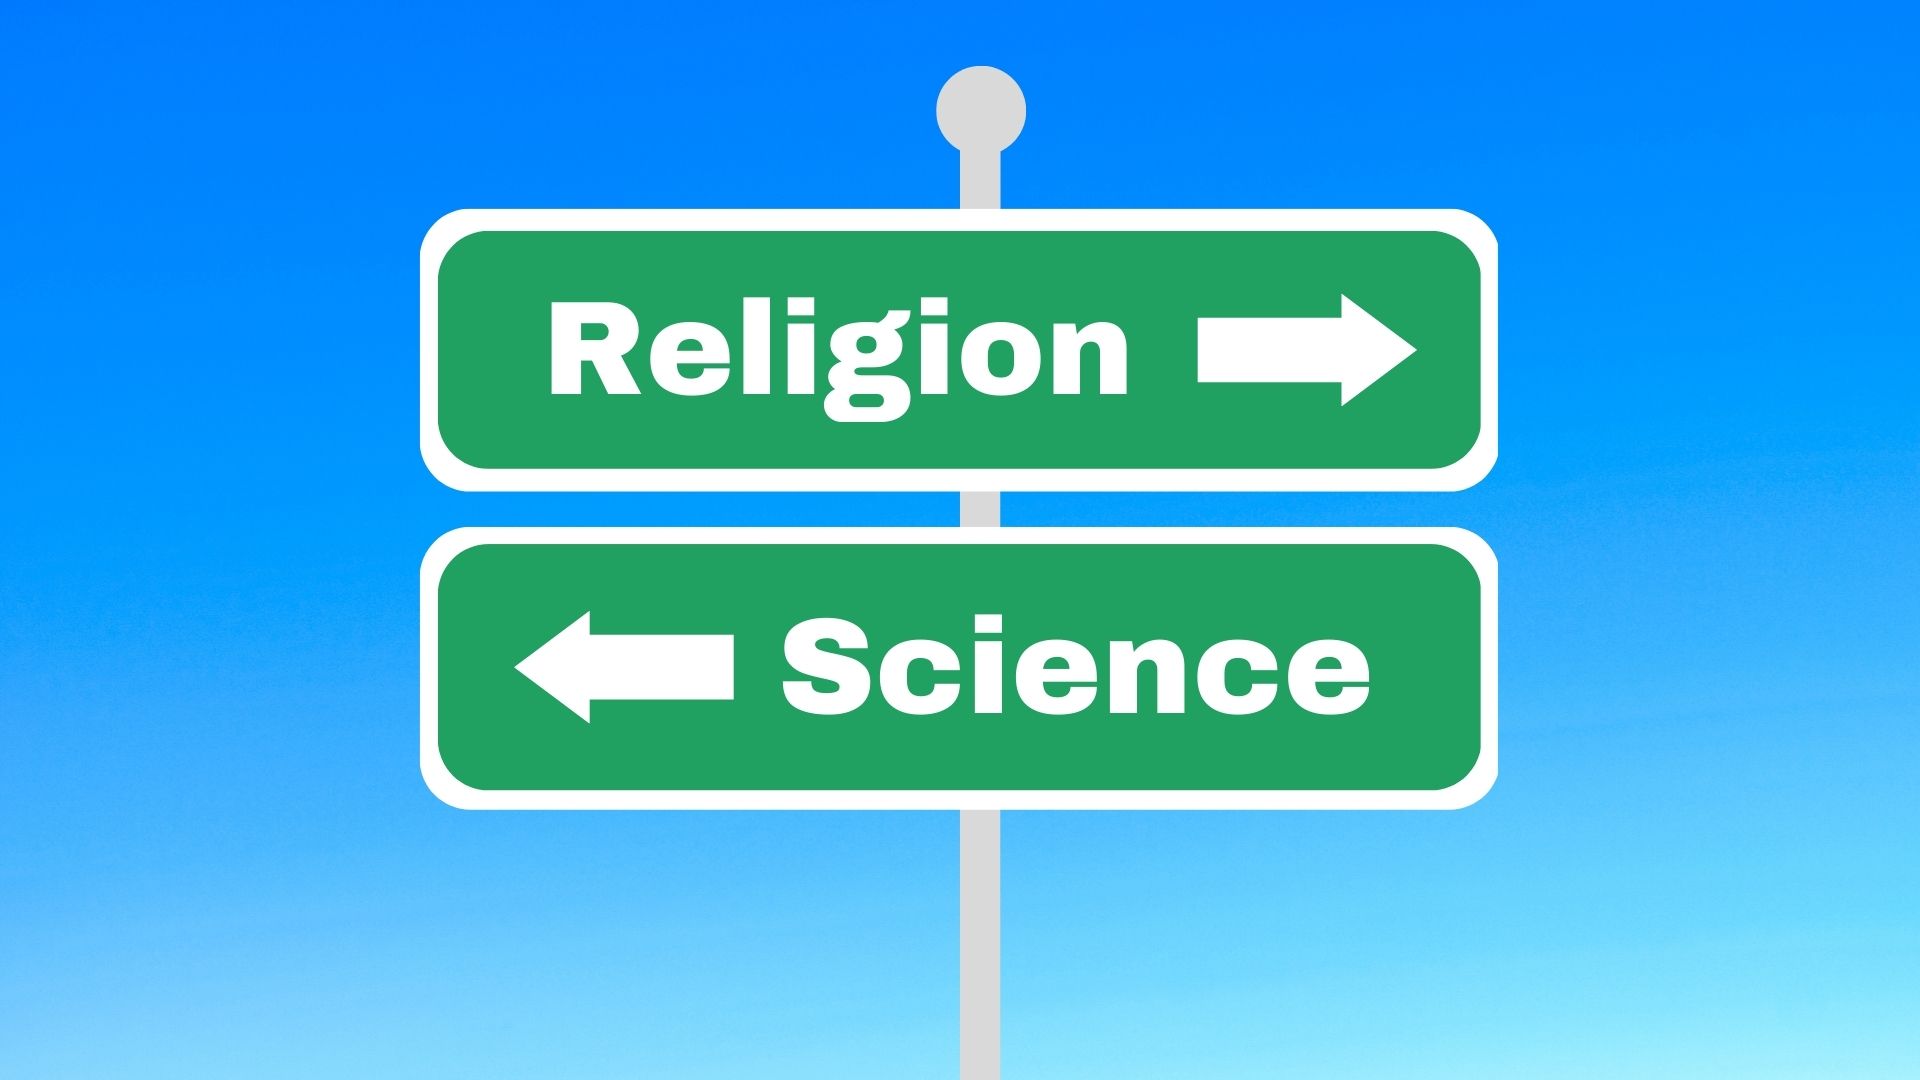 Religion and Science, though opposites, are not necessarily incompatible. Science is based on natural observation, while religion provides answers to personal guidance.